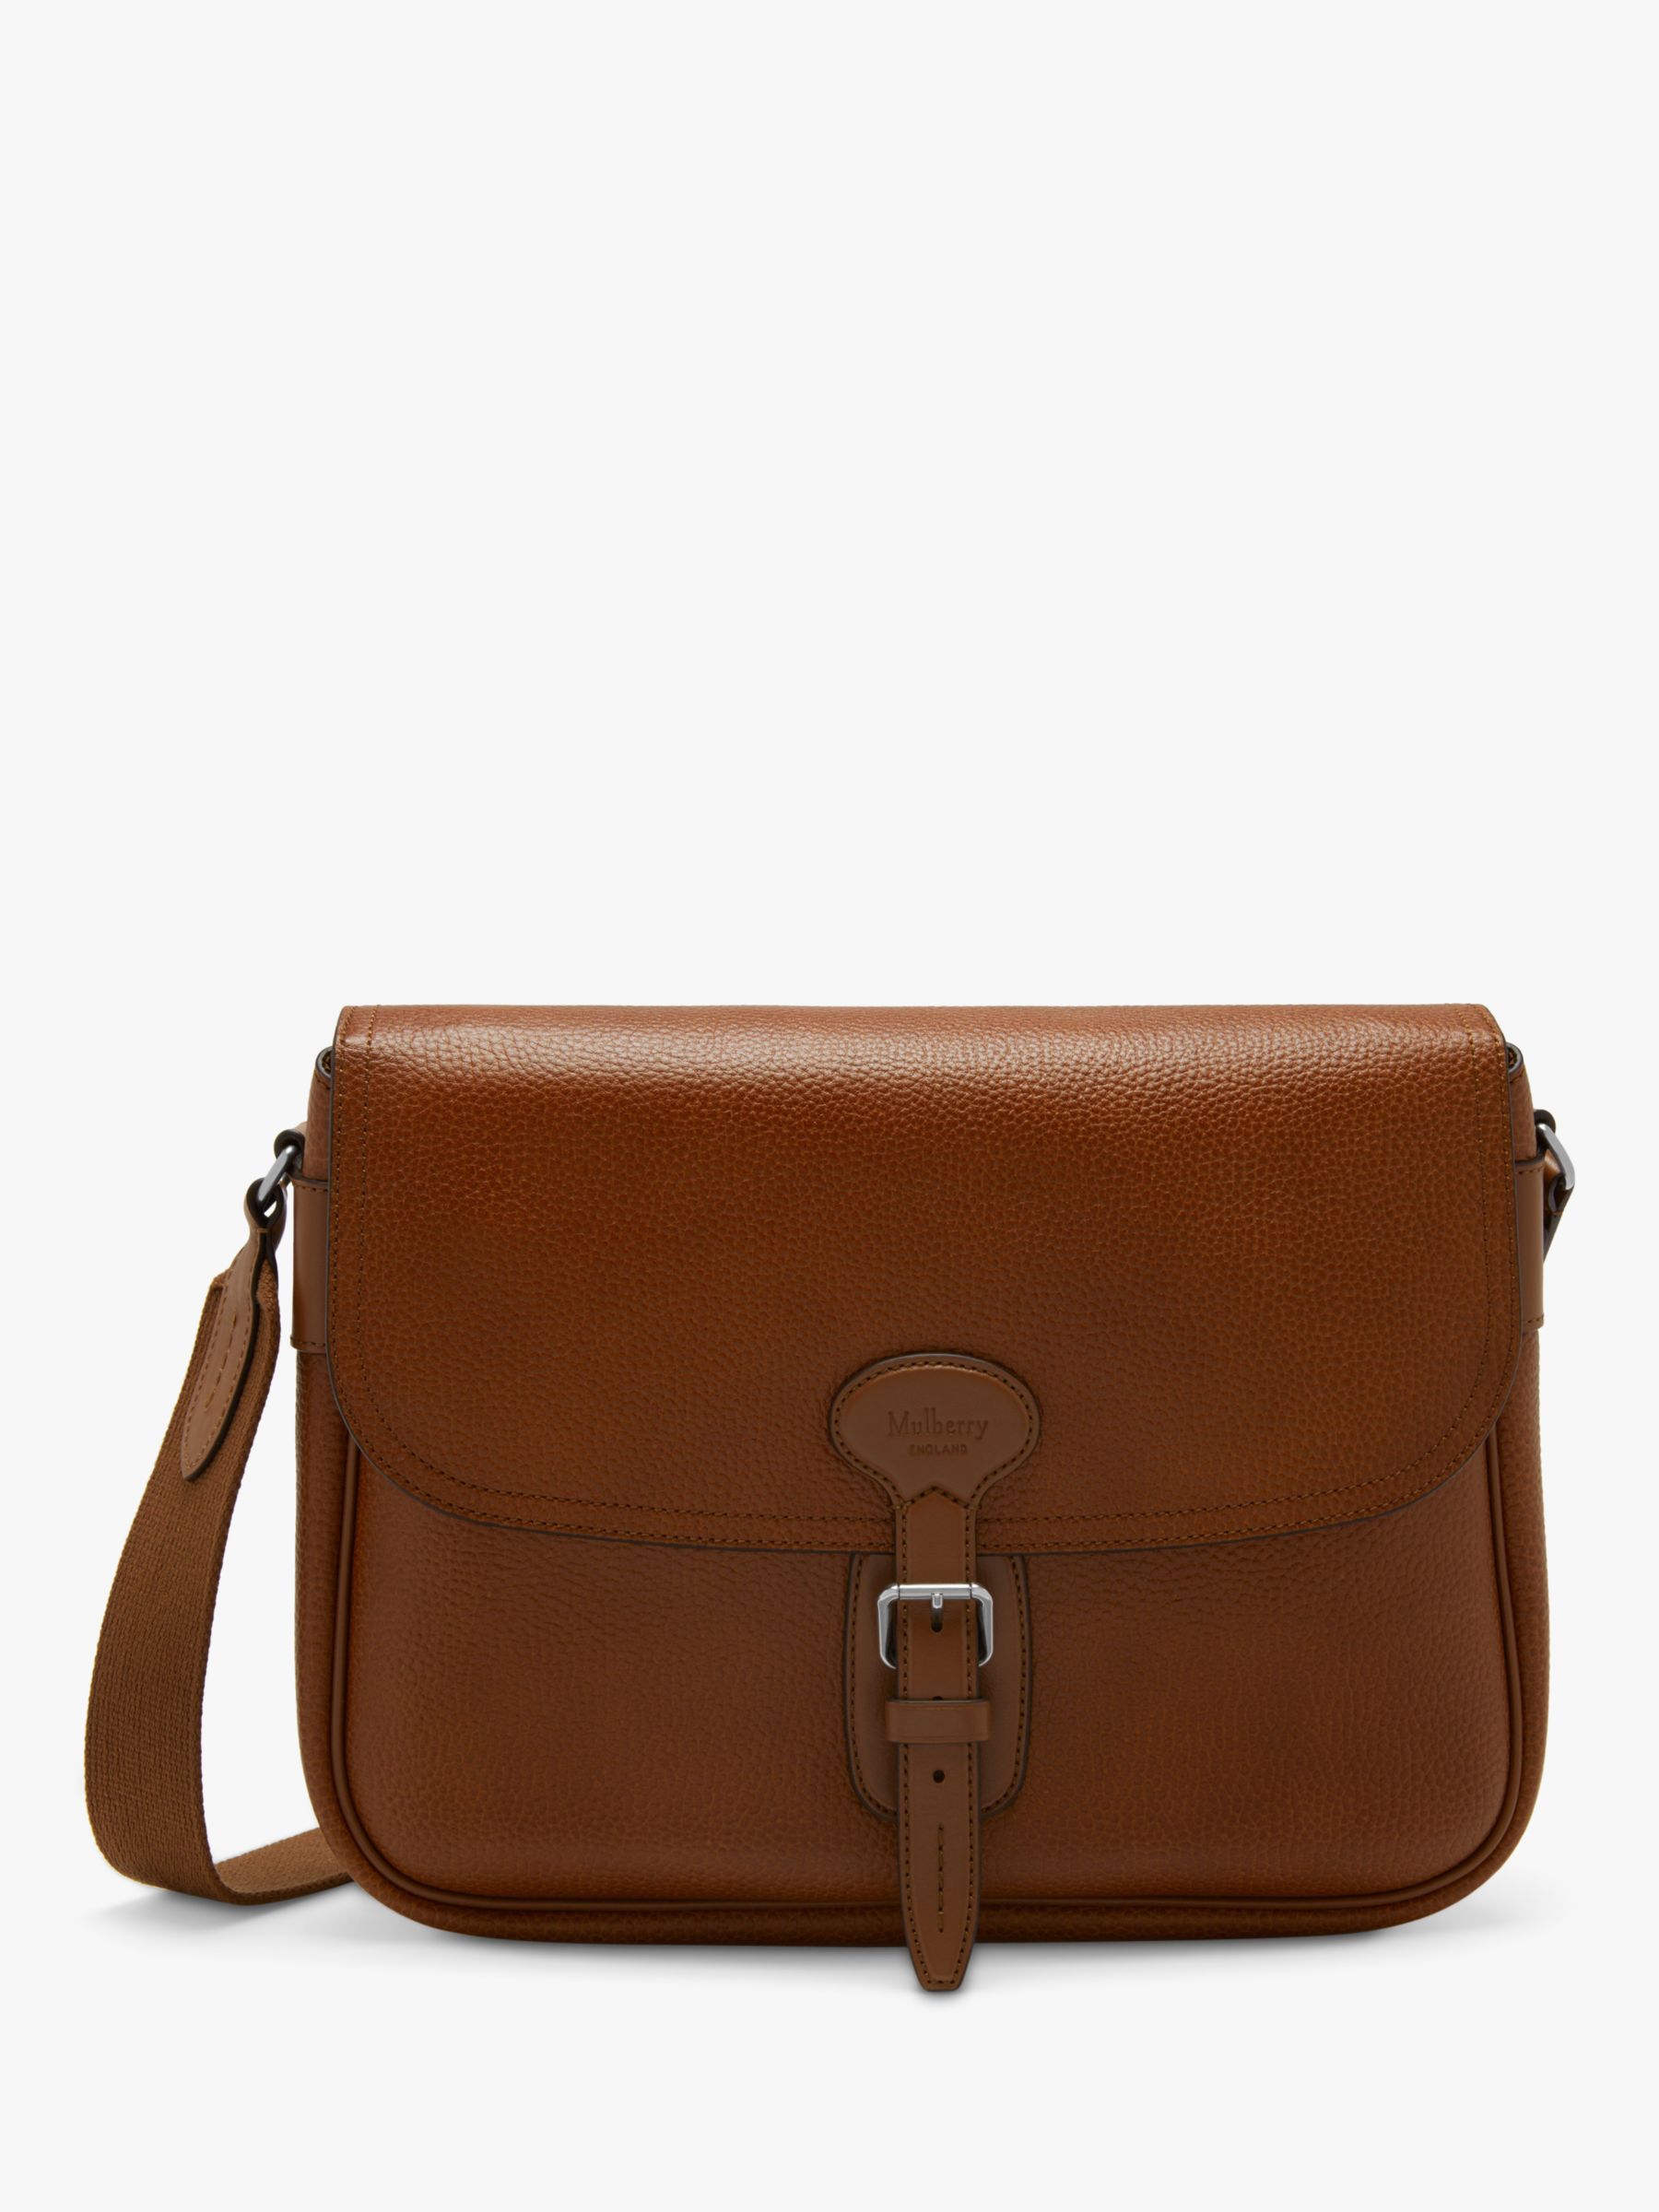 Mulberry Small Heritage Leather Messenger Bag, Oak